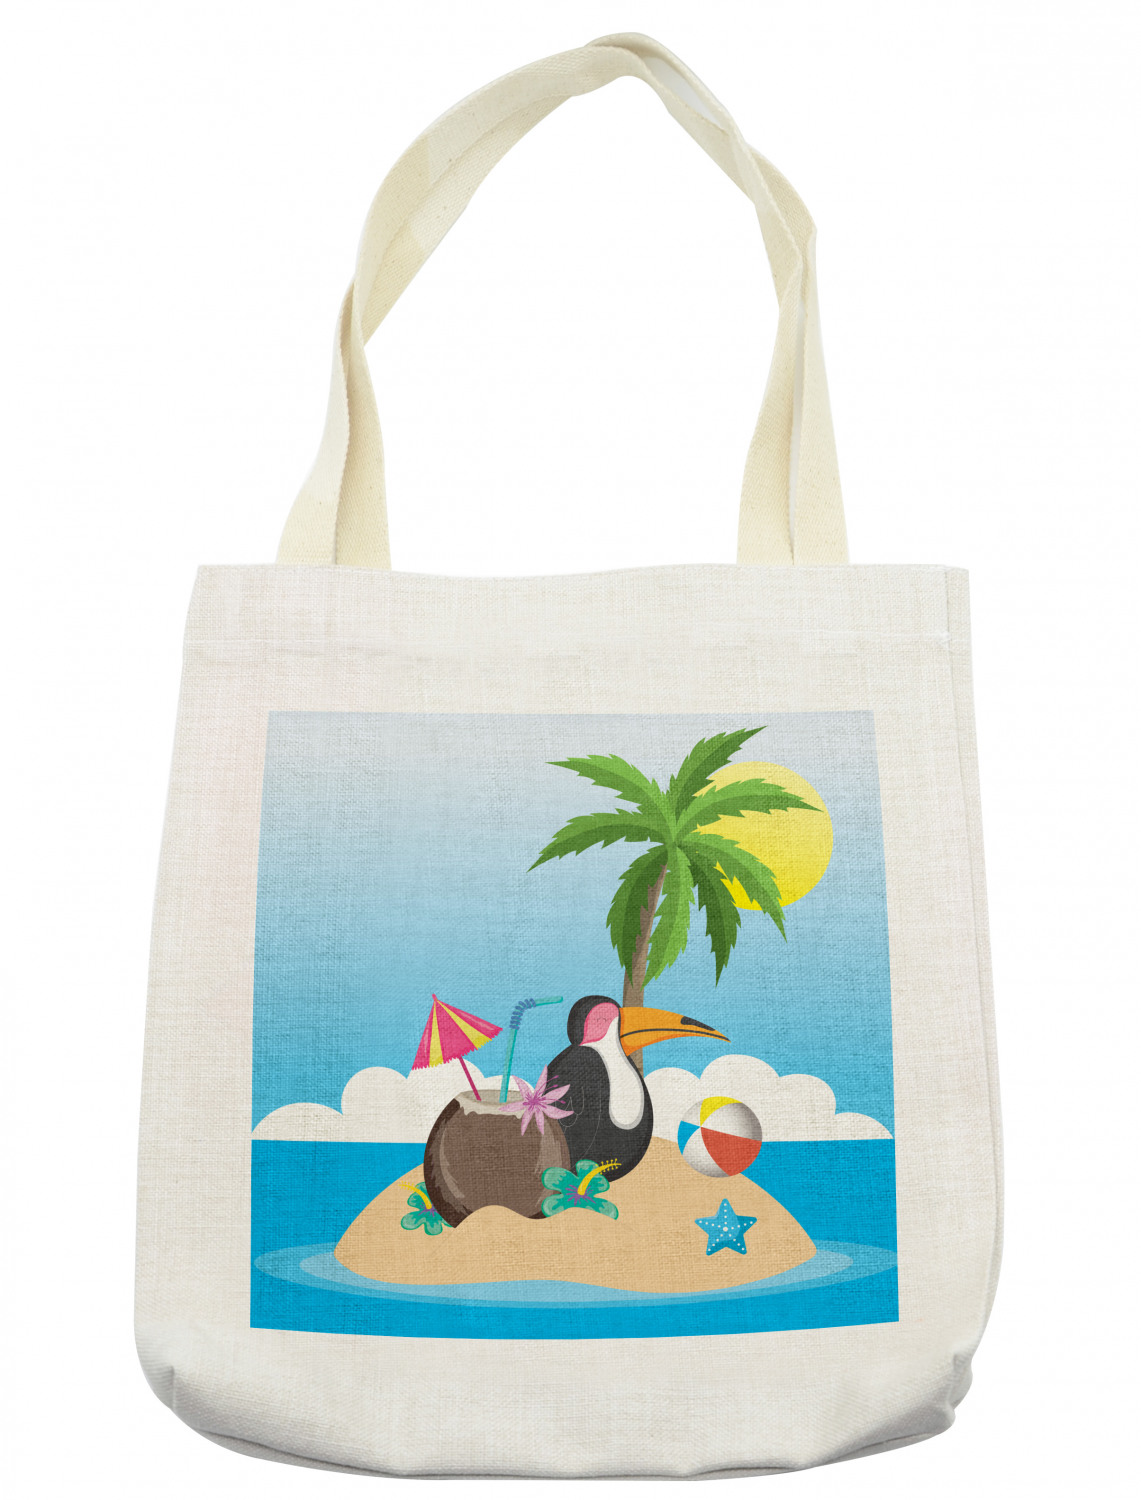 Details about   Ambesonne Cartoon Theme Tote Bag Reusable Linen Sack Shopping Books Beach 